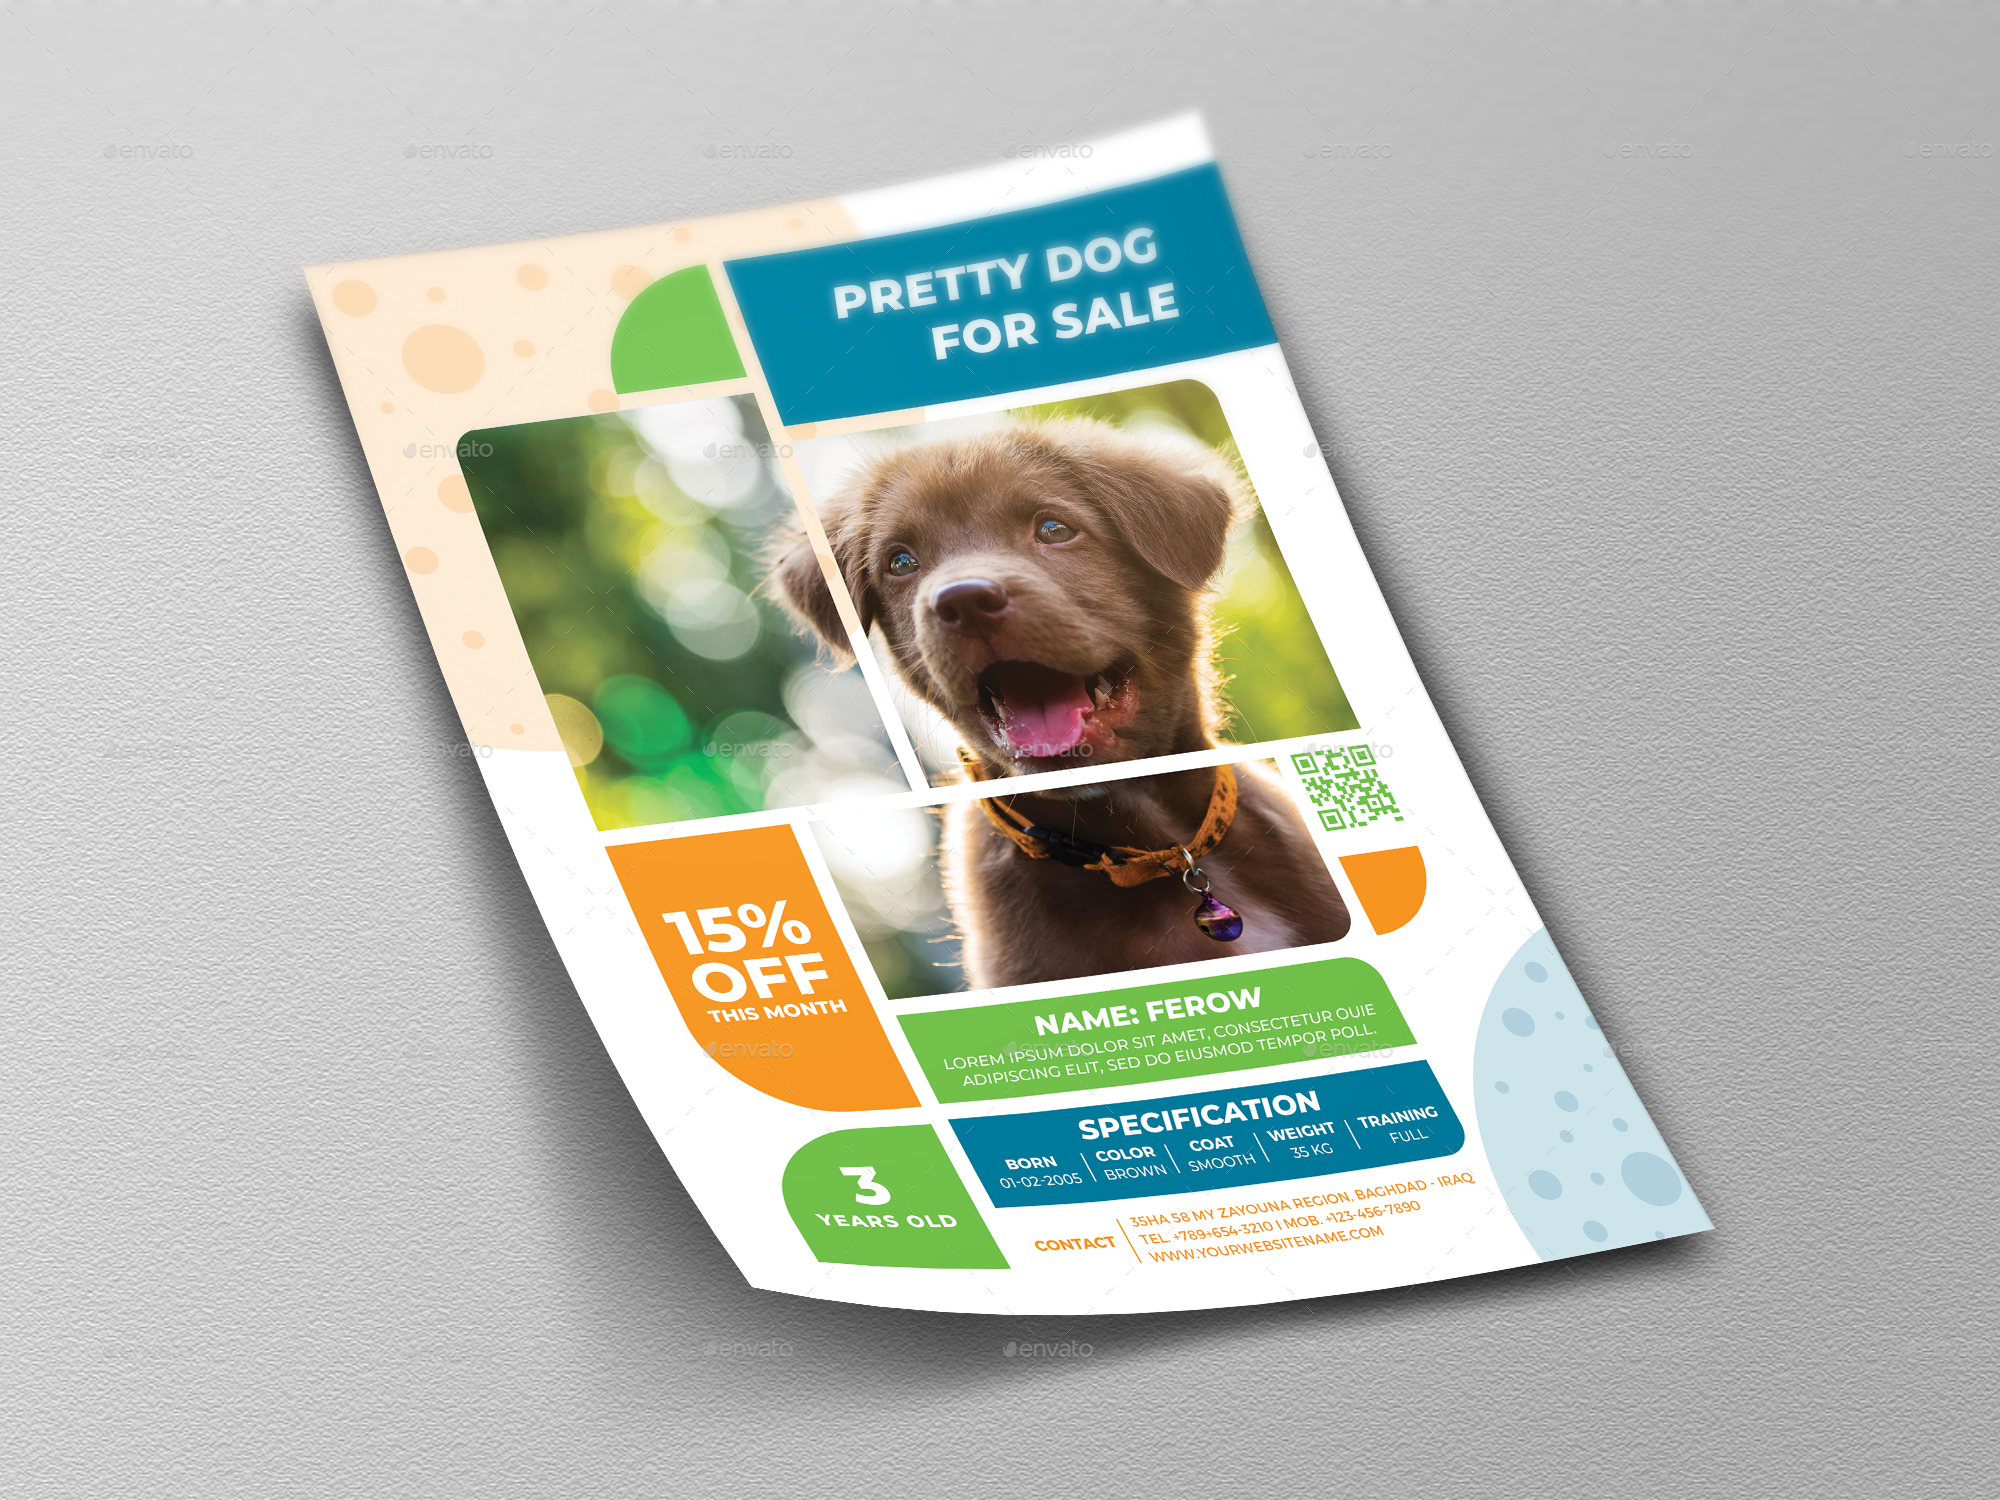 Pets for Sale Flyer Template Intended For Puppies For Sale Flyer Template Regarding Puppies For Sale Flyer Template